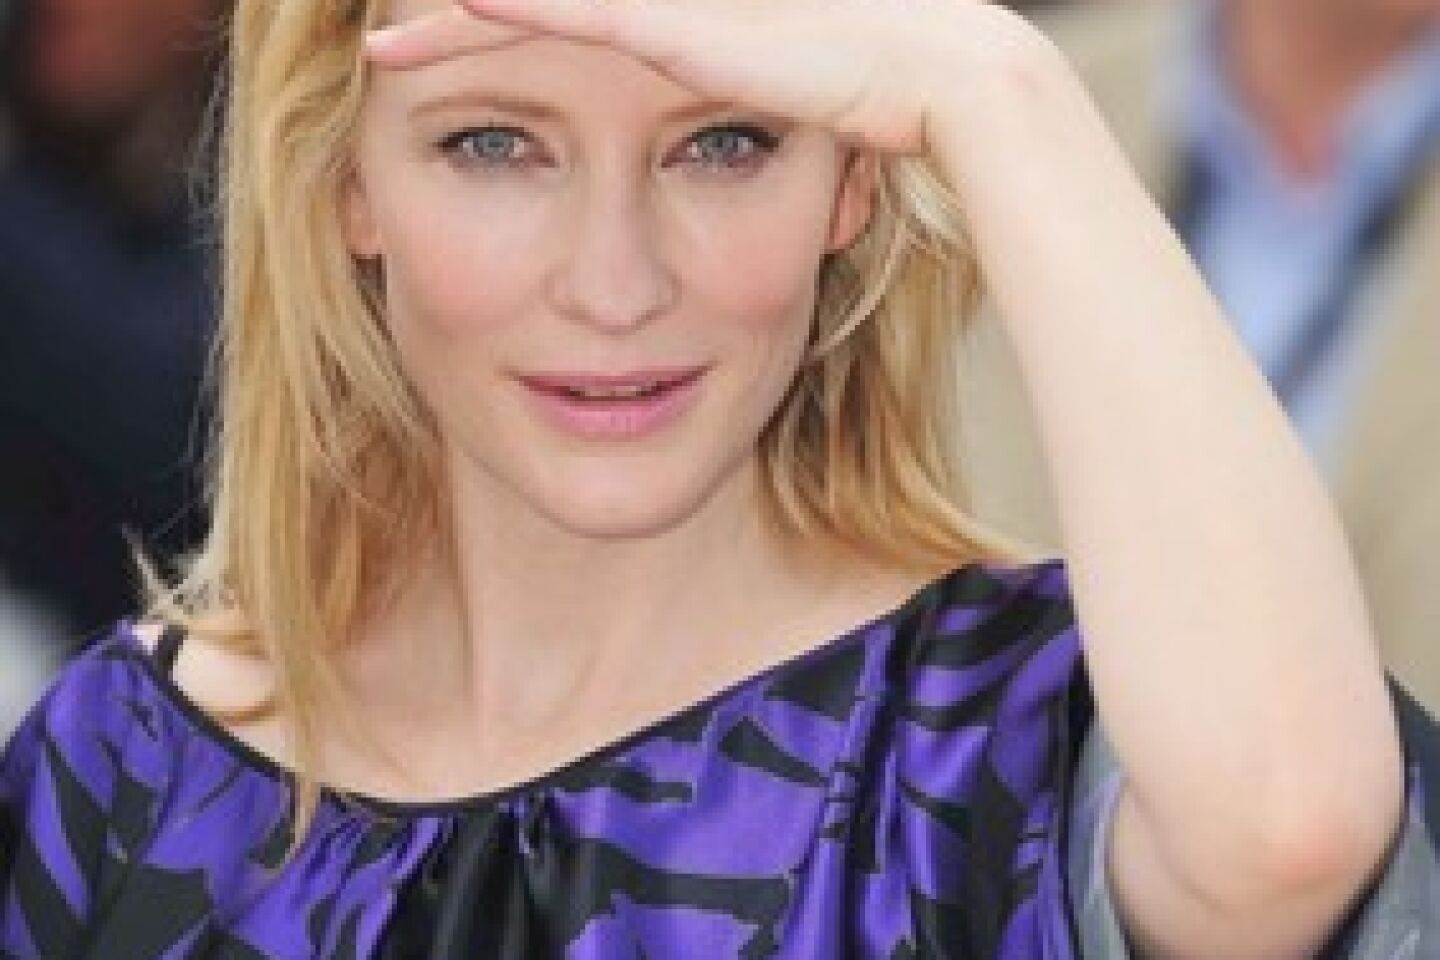 Cate Blanchett at the Cannes premiere of "Indiana Jones and the Kingdom of the Crystal Skull."